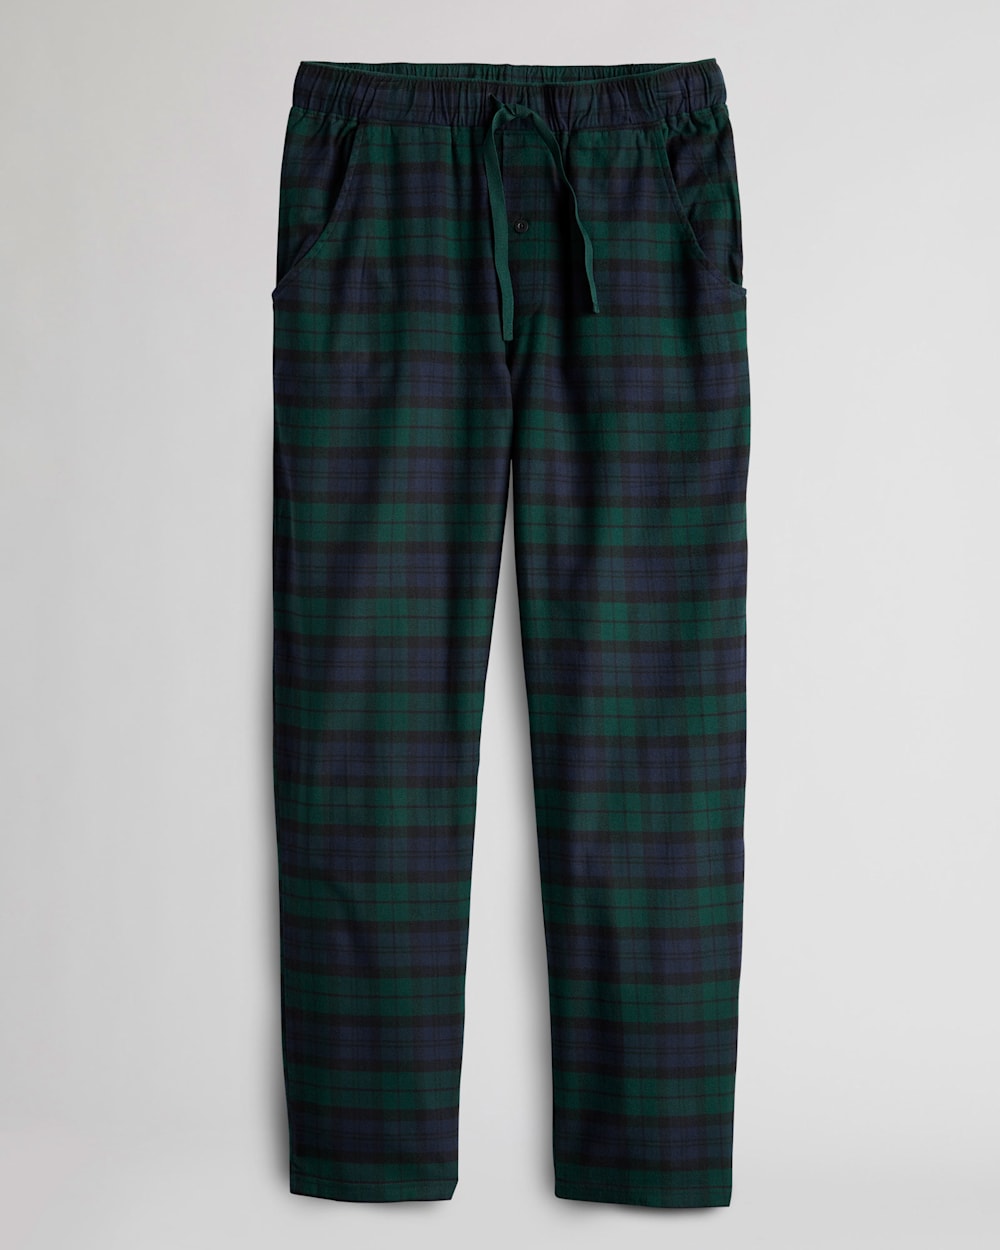 MEN'S FLANNEL PAJAMA PANTS IN GREEN/BLUE PLAID image number 1